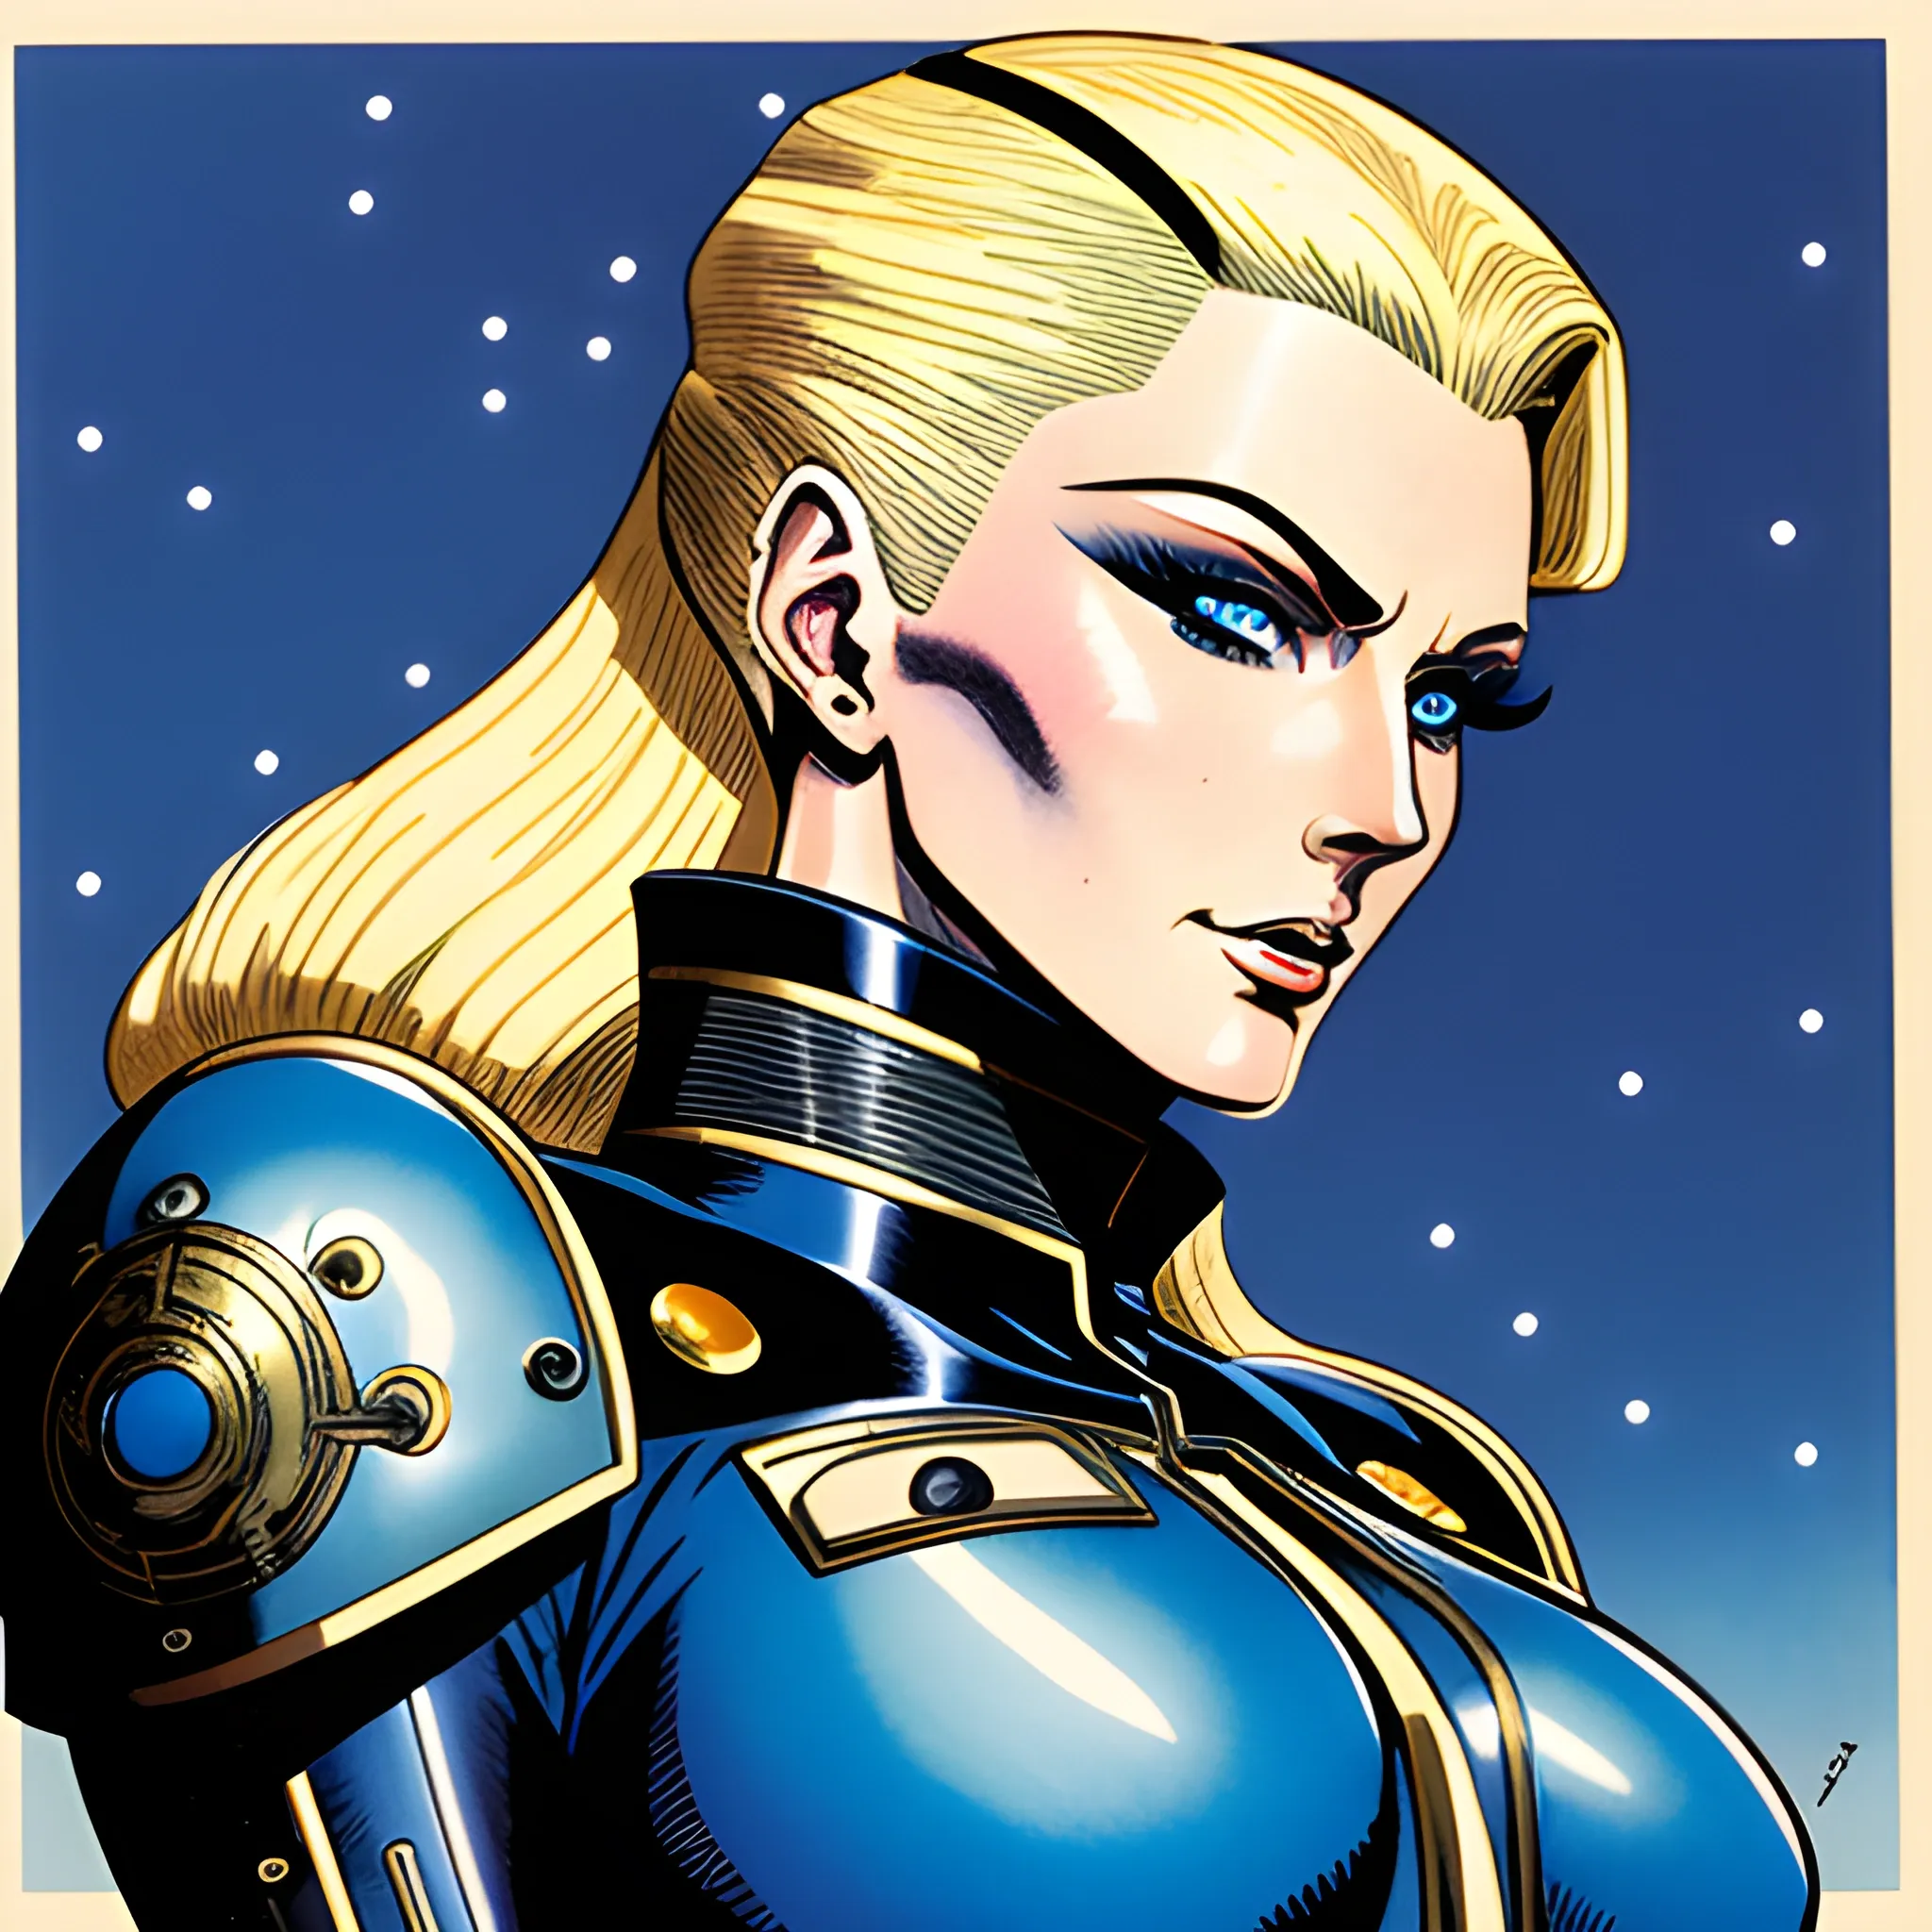 futuristic steampunk giant starship, macro art, anime girl blonde hair blue eyes wearing military nazi ss uniform, ripples, full body illustration by al williamson, perfect face viewed in profile